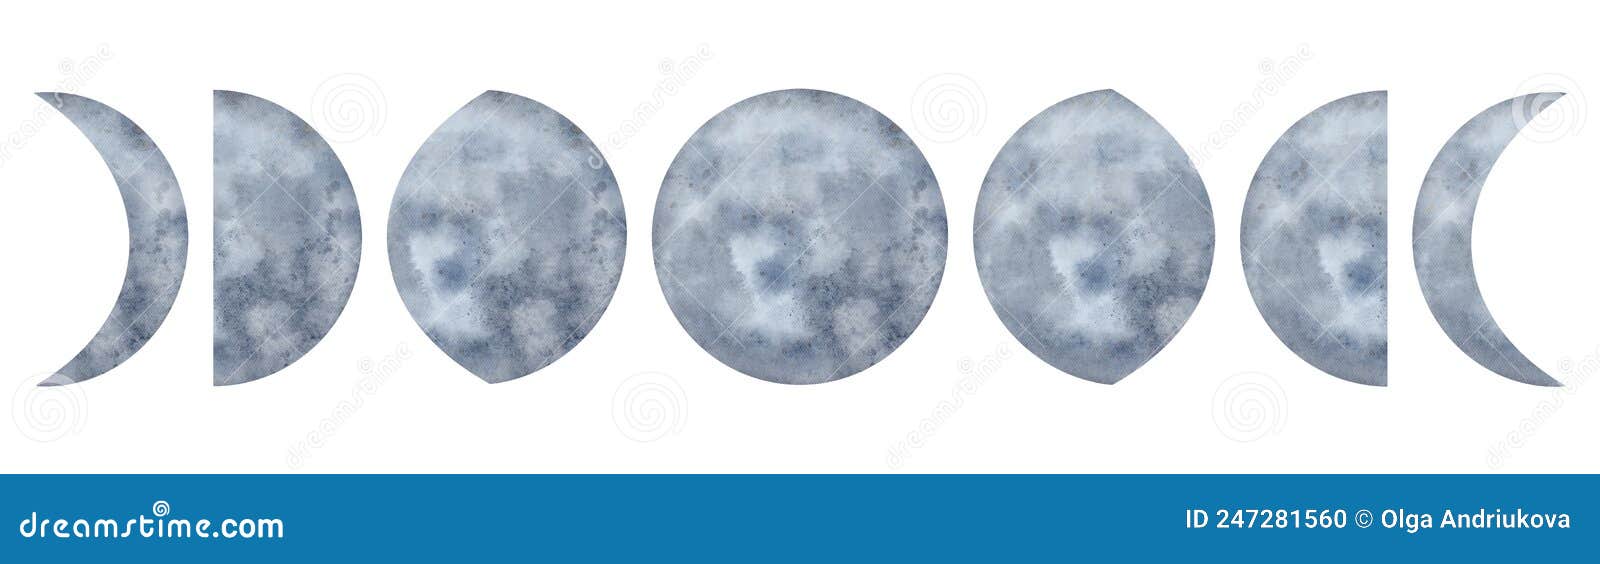 Watercolor Moon Phases Full Crescent Quarter Waning And Waxing Moon